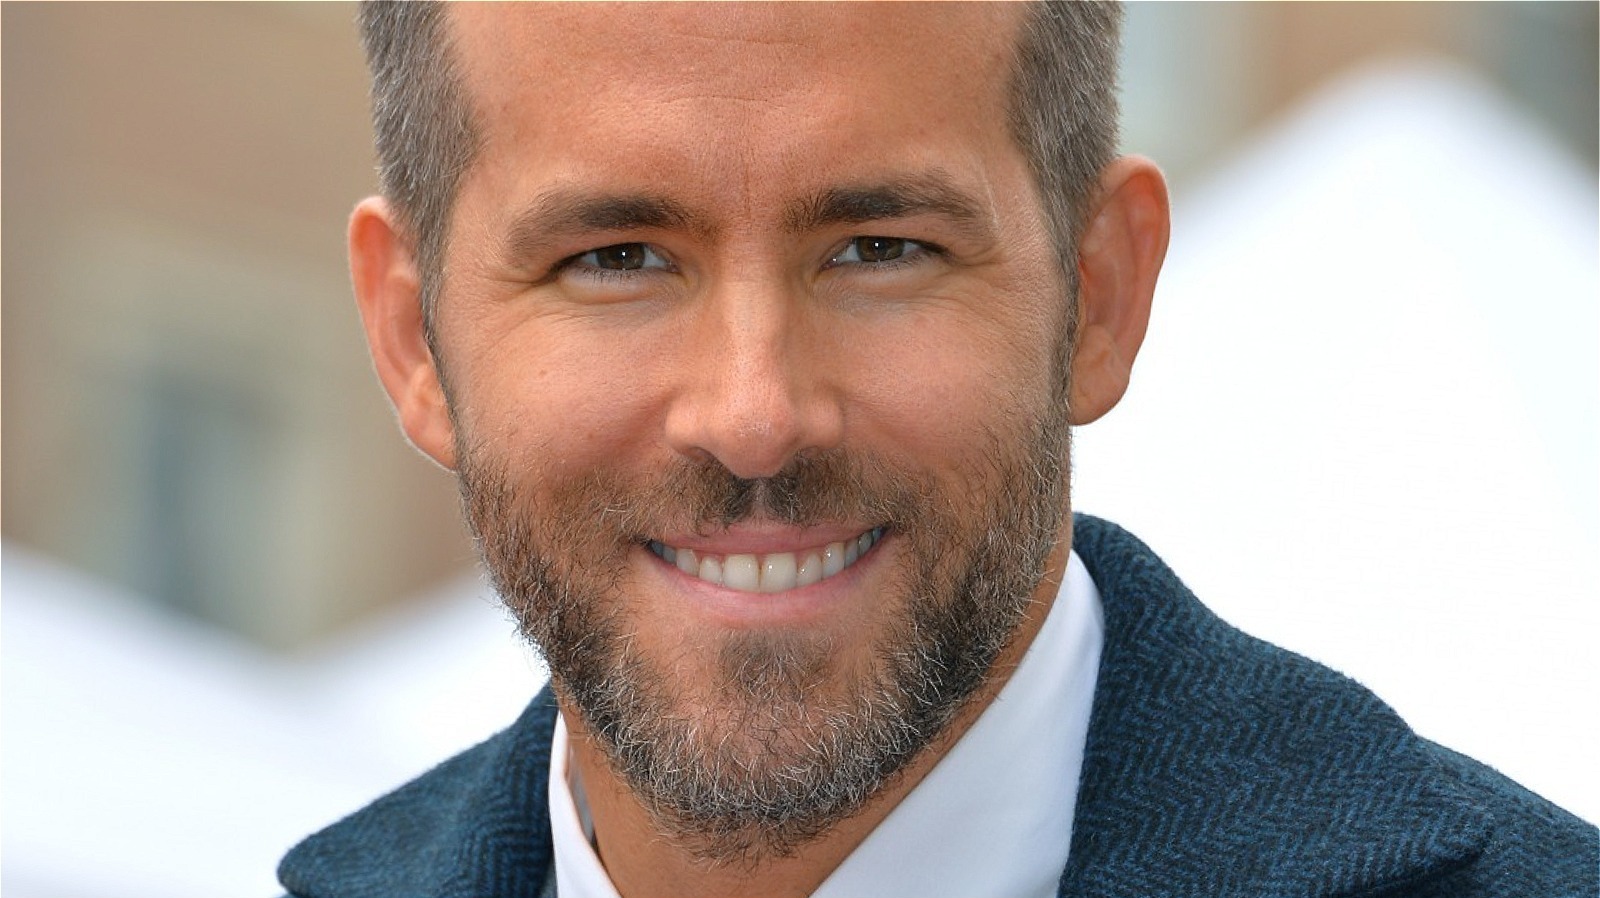 Ryan Reynolds' Gin Distillery Tour Will Trap You In The Actor's Office